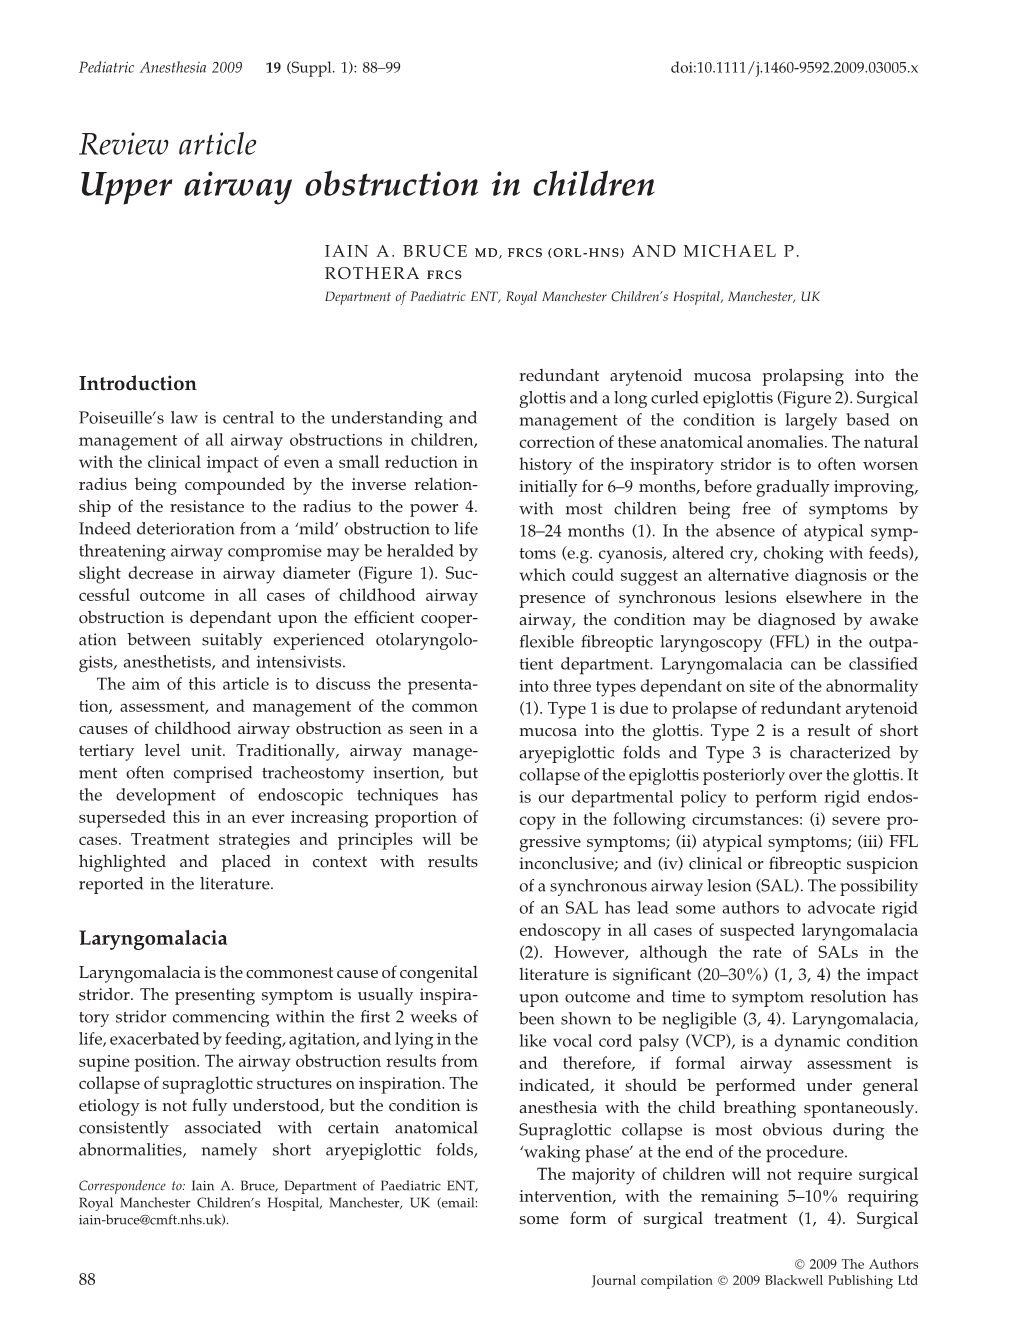 Review Article Upper Airway Obstruction in Children